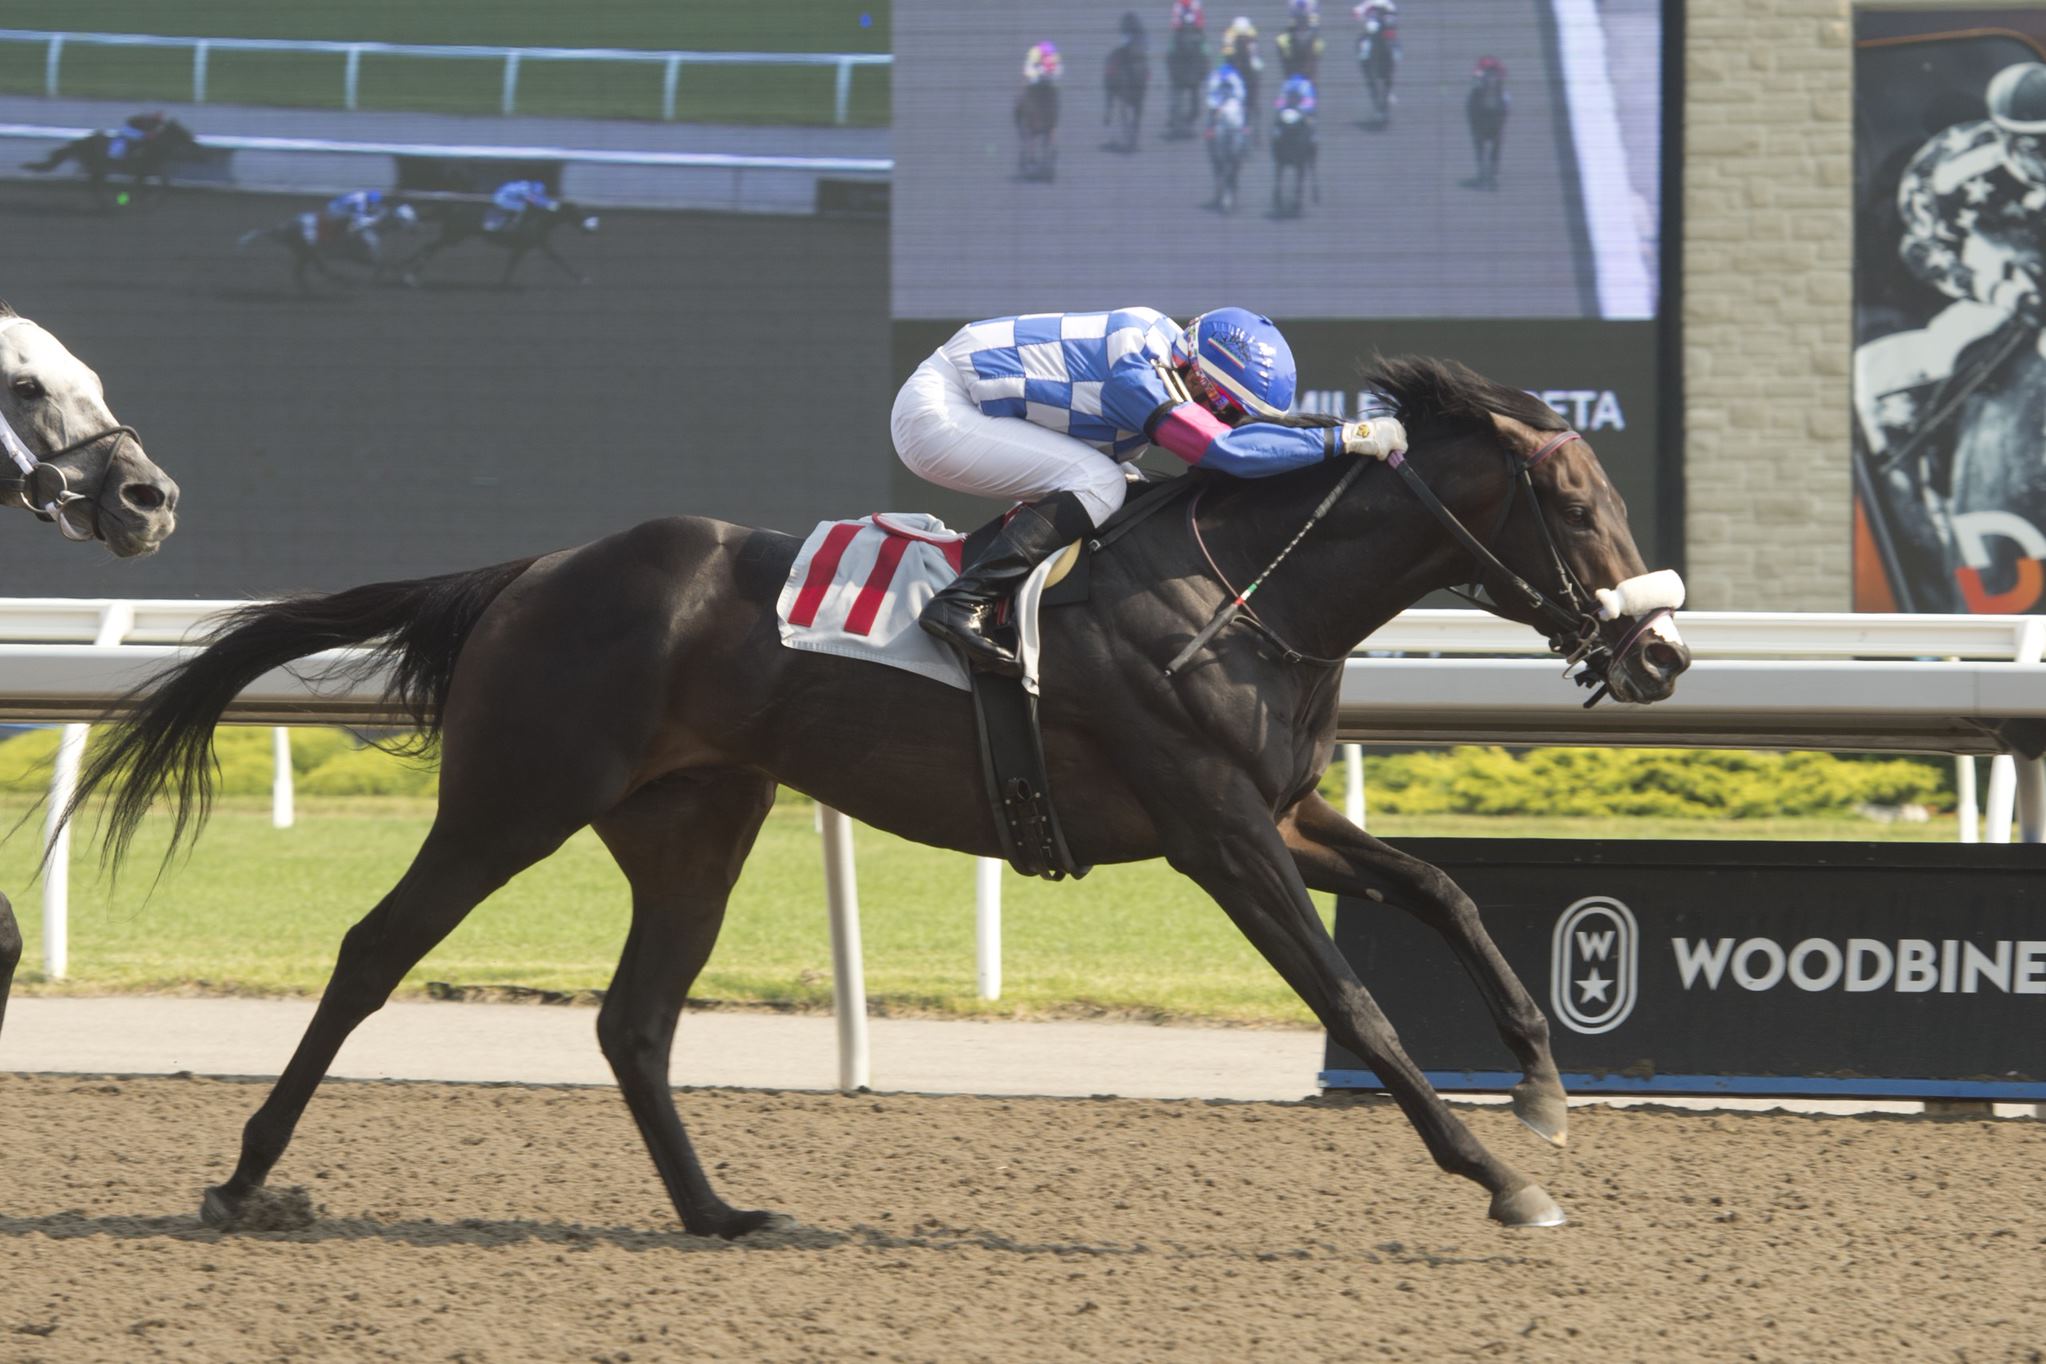 Horse racing at Woodbine and Keeneland headline a busy thoroughbred racing schedule with plenty of betting implications